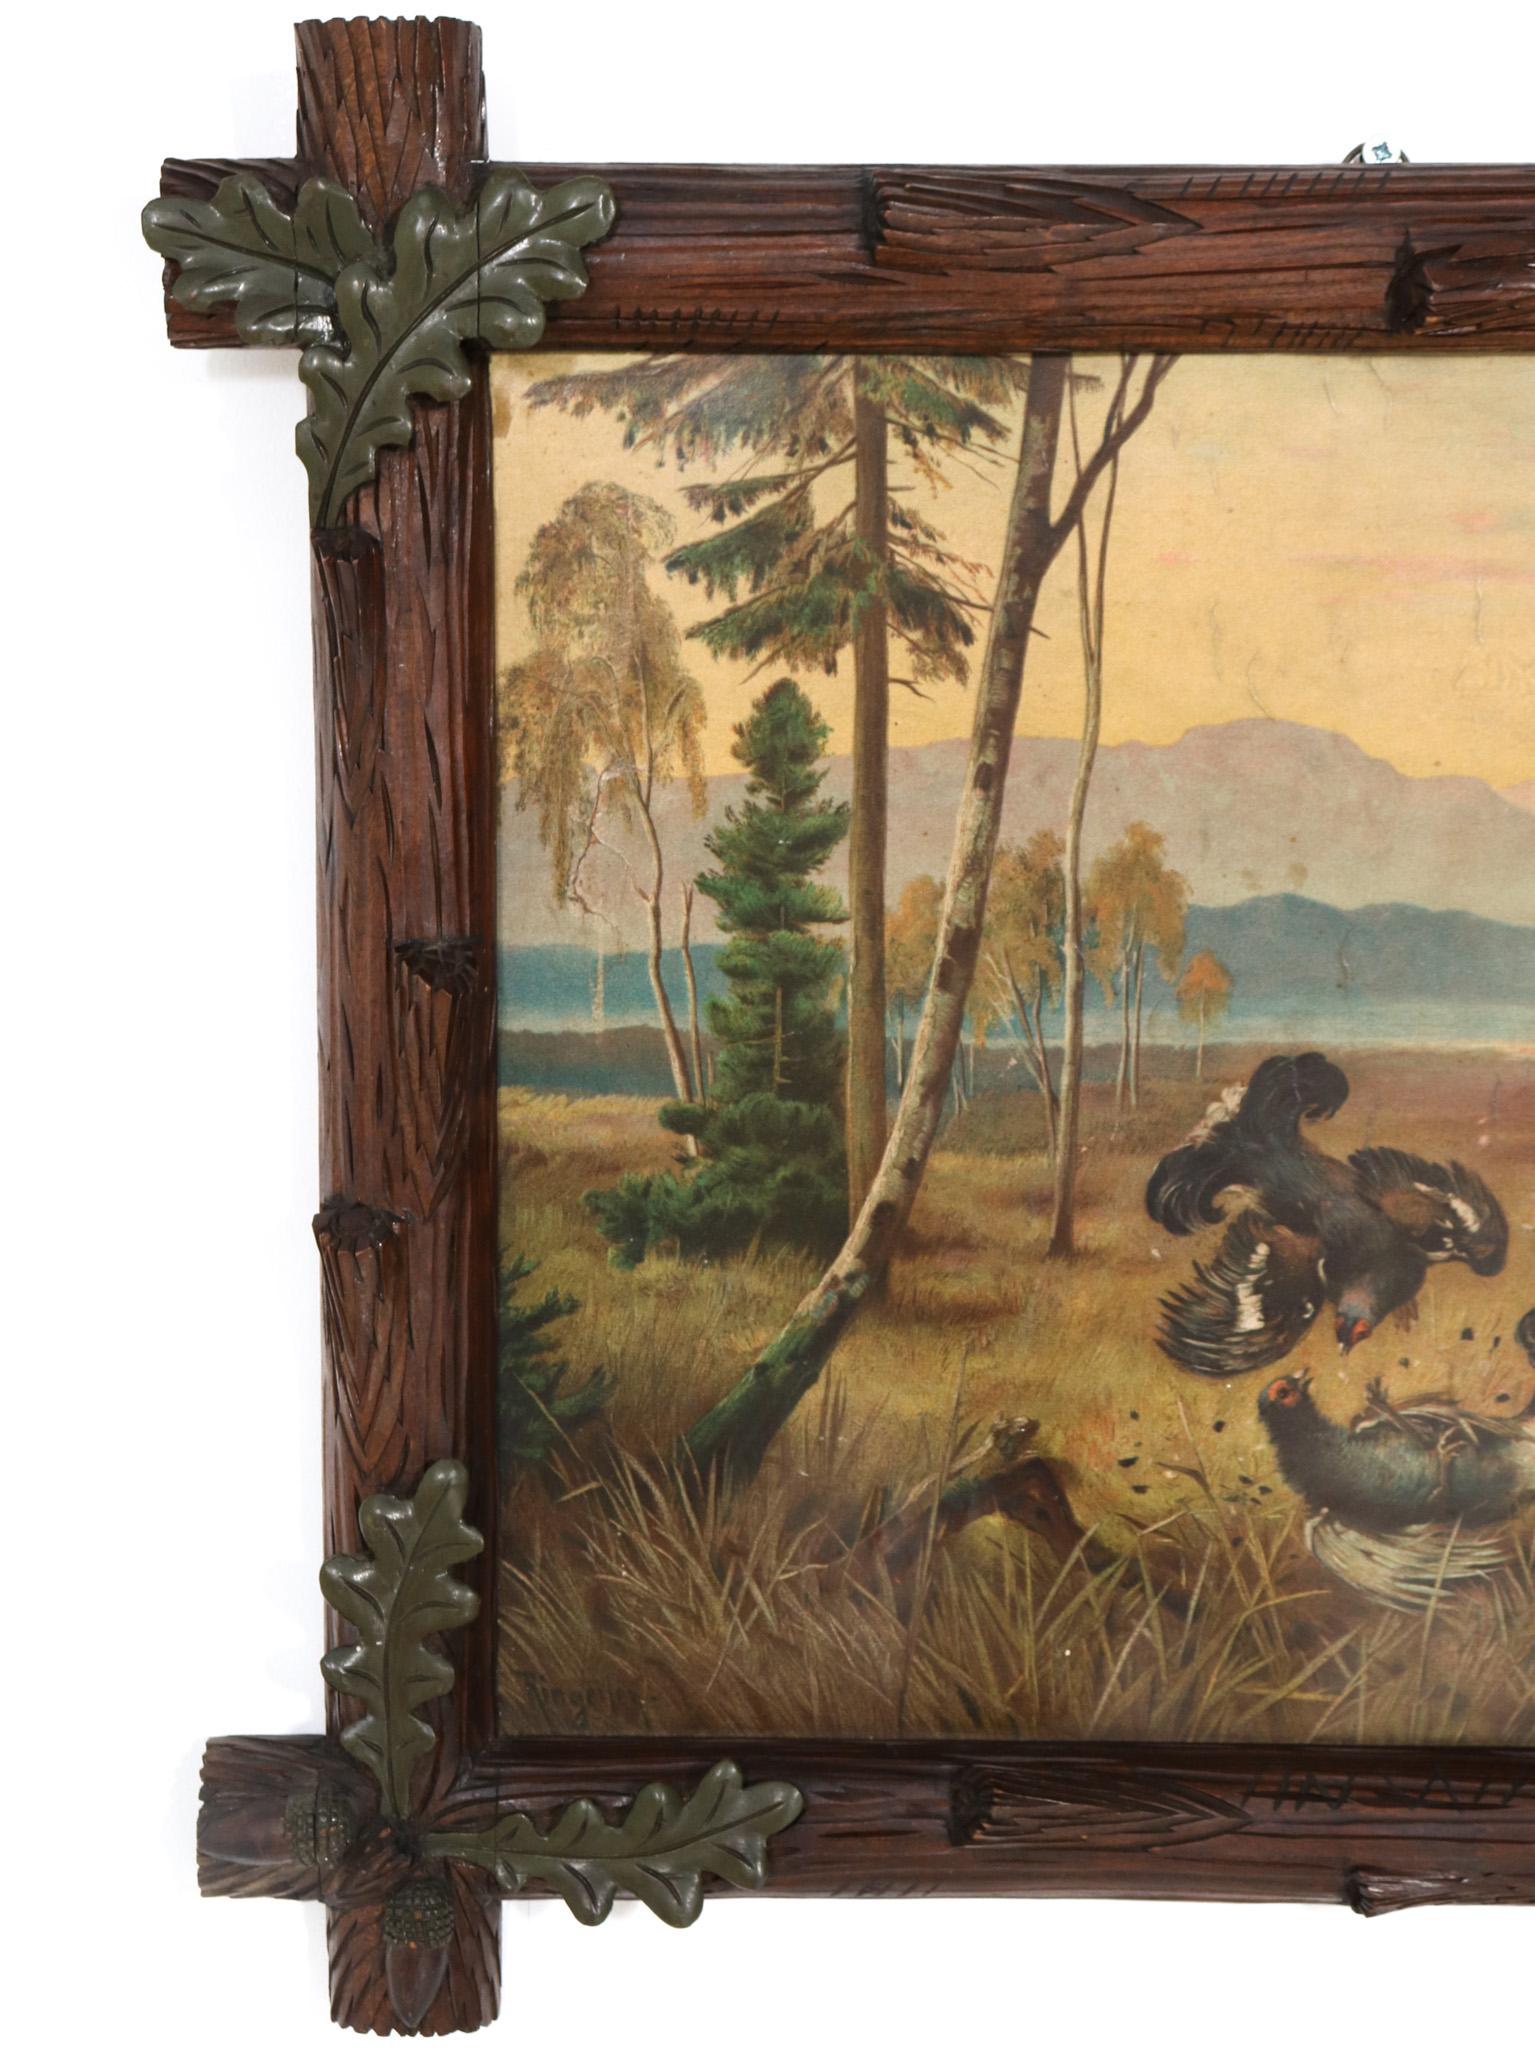 Stunning Black Forest picture frame.
Striking German design from the 1900s.
Hand-carved and hand-painted fruitwood frame.
This wonderful hand-carved and hand-painted Black Forest picture frame is in very good original condition with minor wear